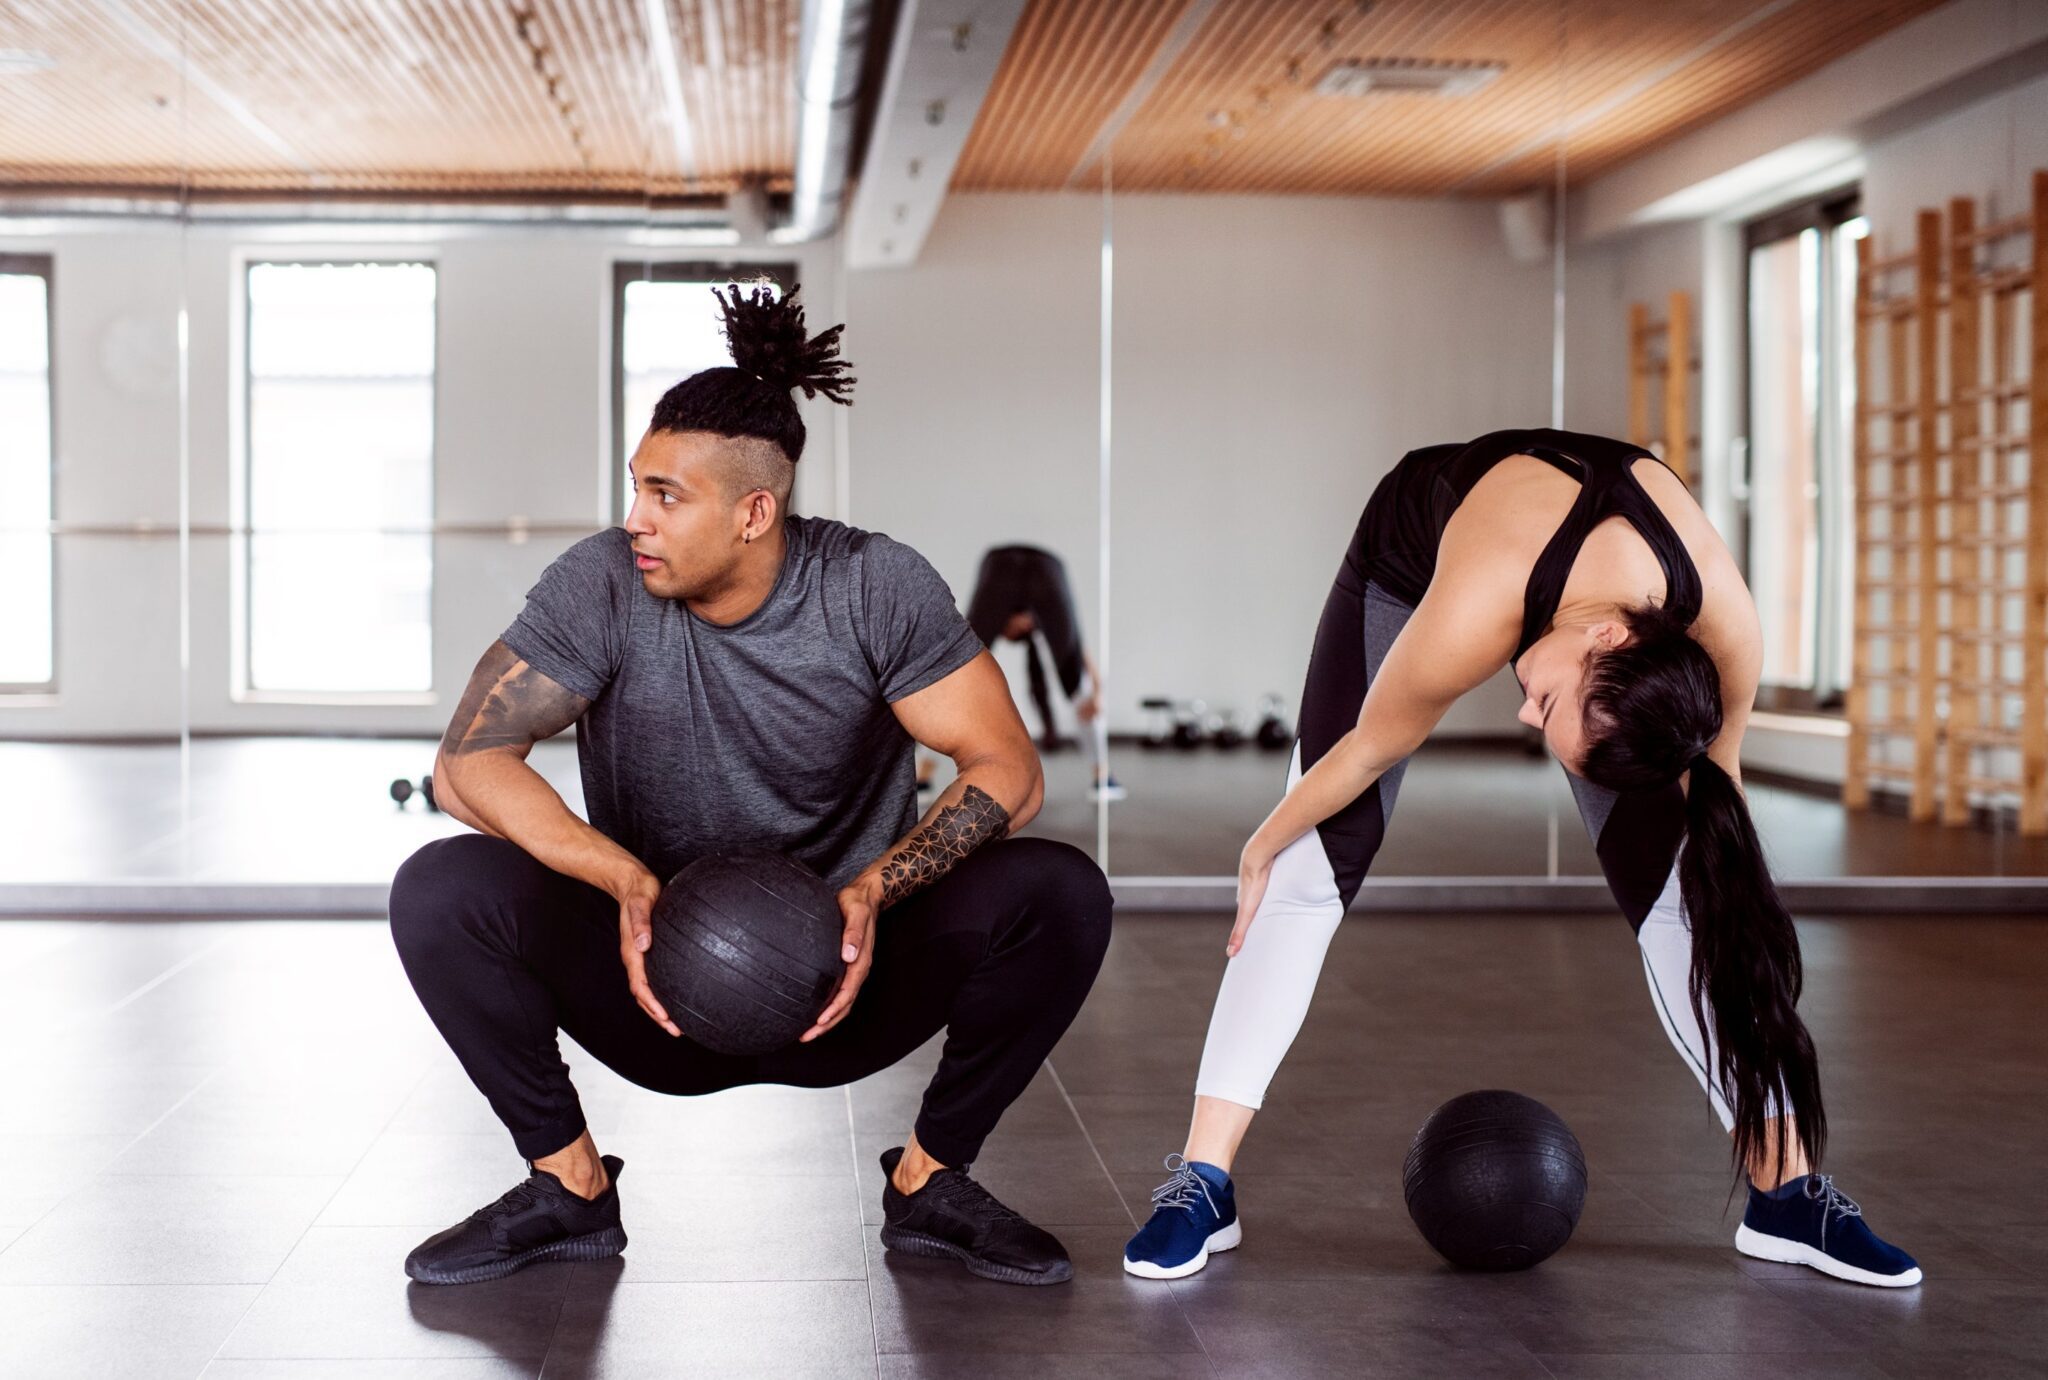 A man and woman working out with medicine balls.